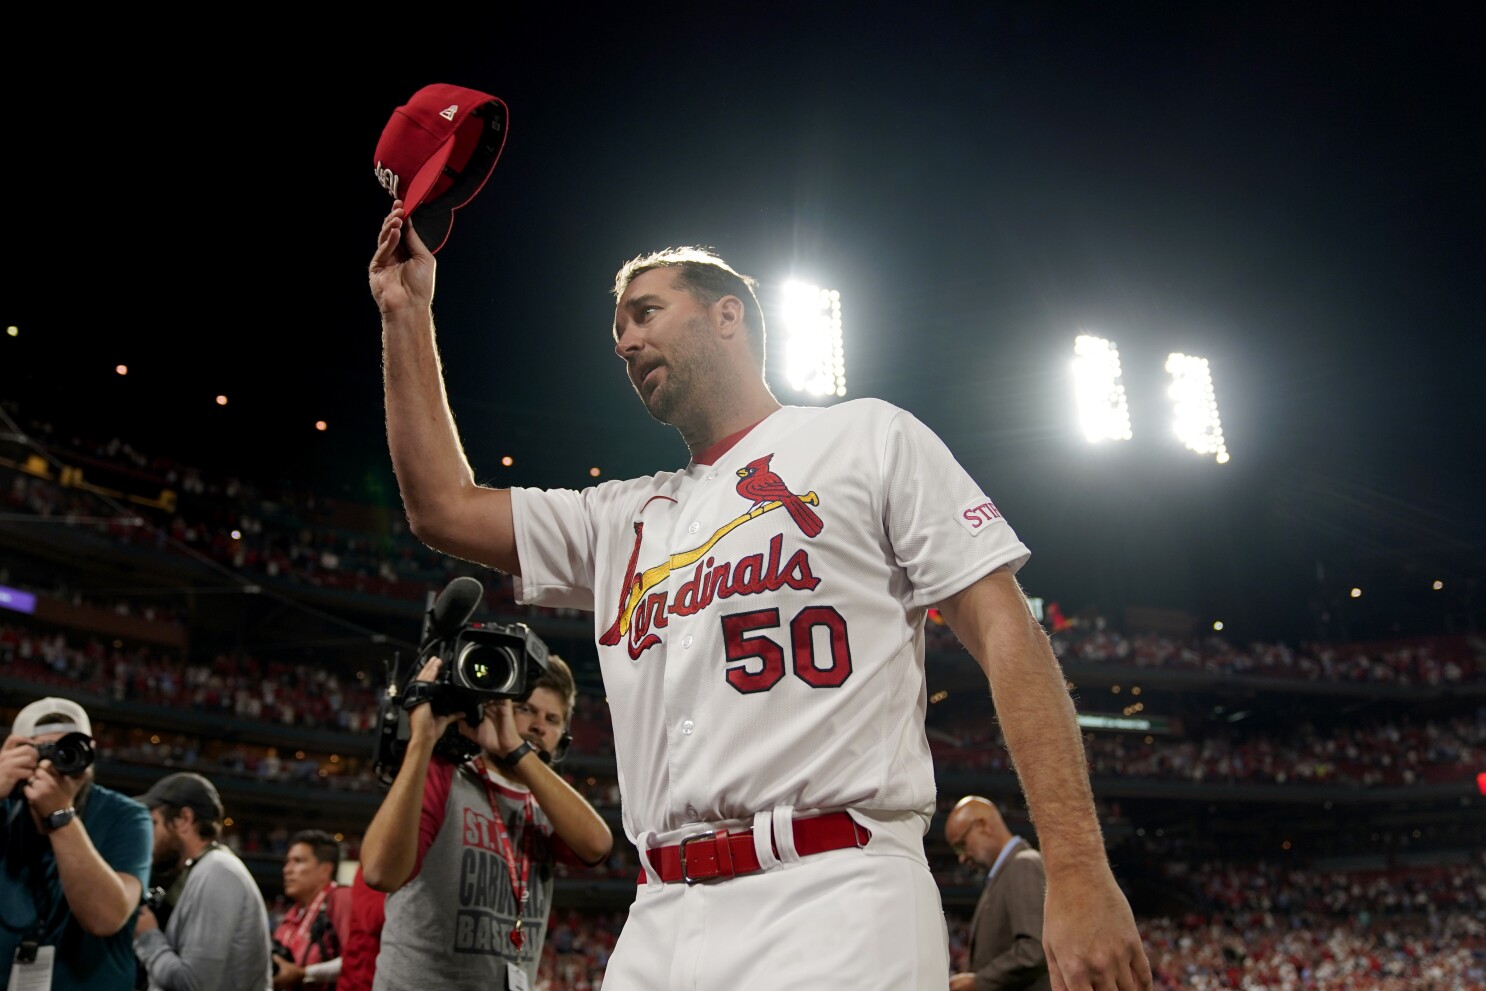 St. Louis Cardinals pitcher Adam Wainwright on team's awful season: We  lose in different ways every game